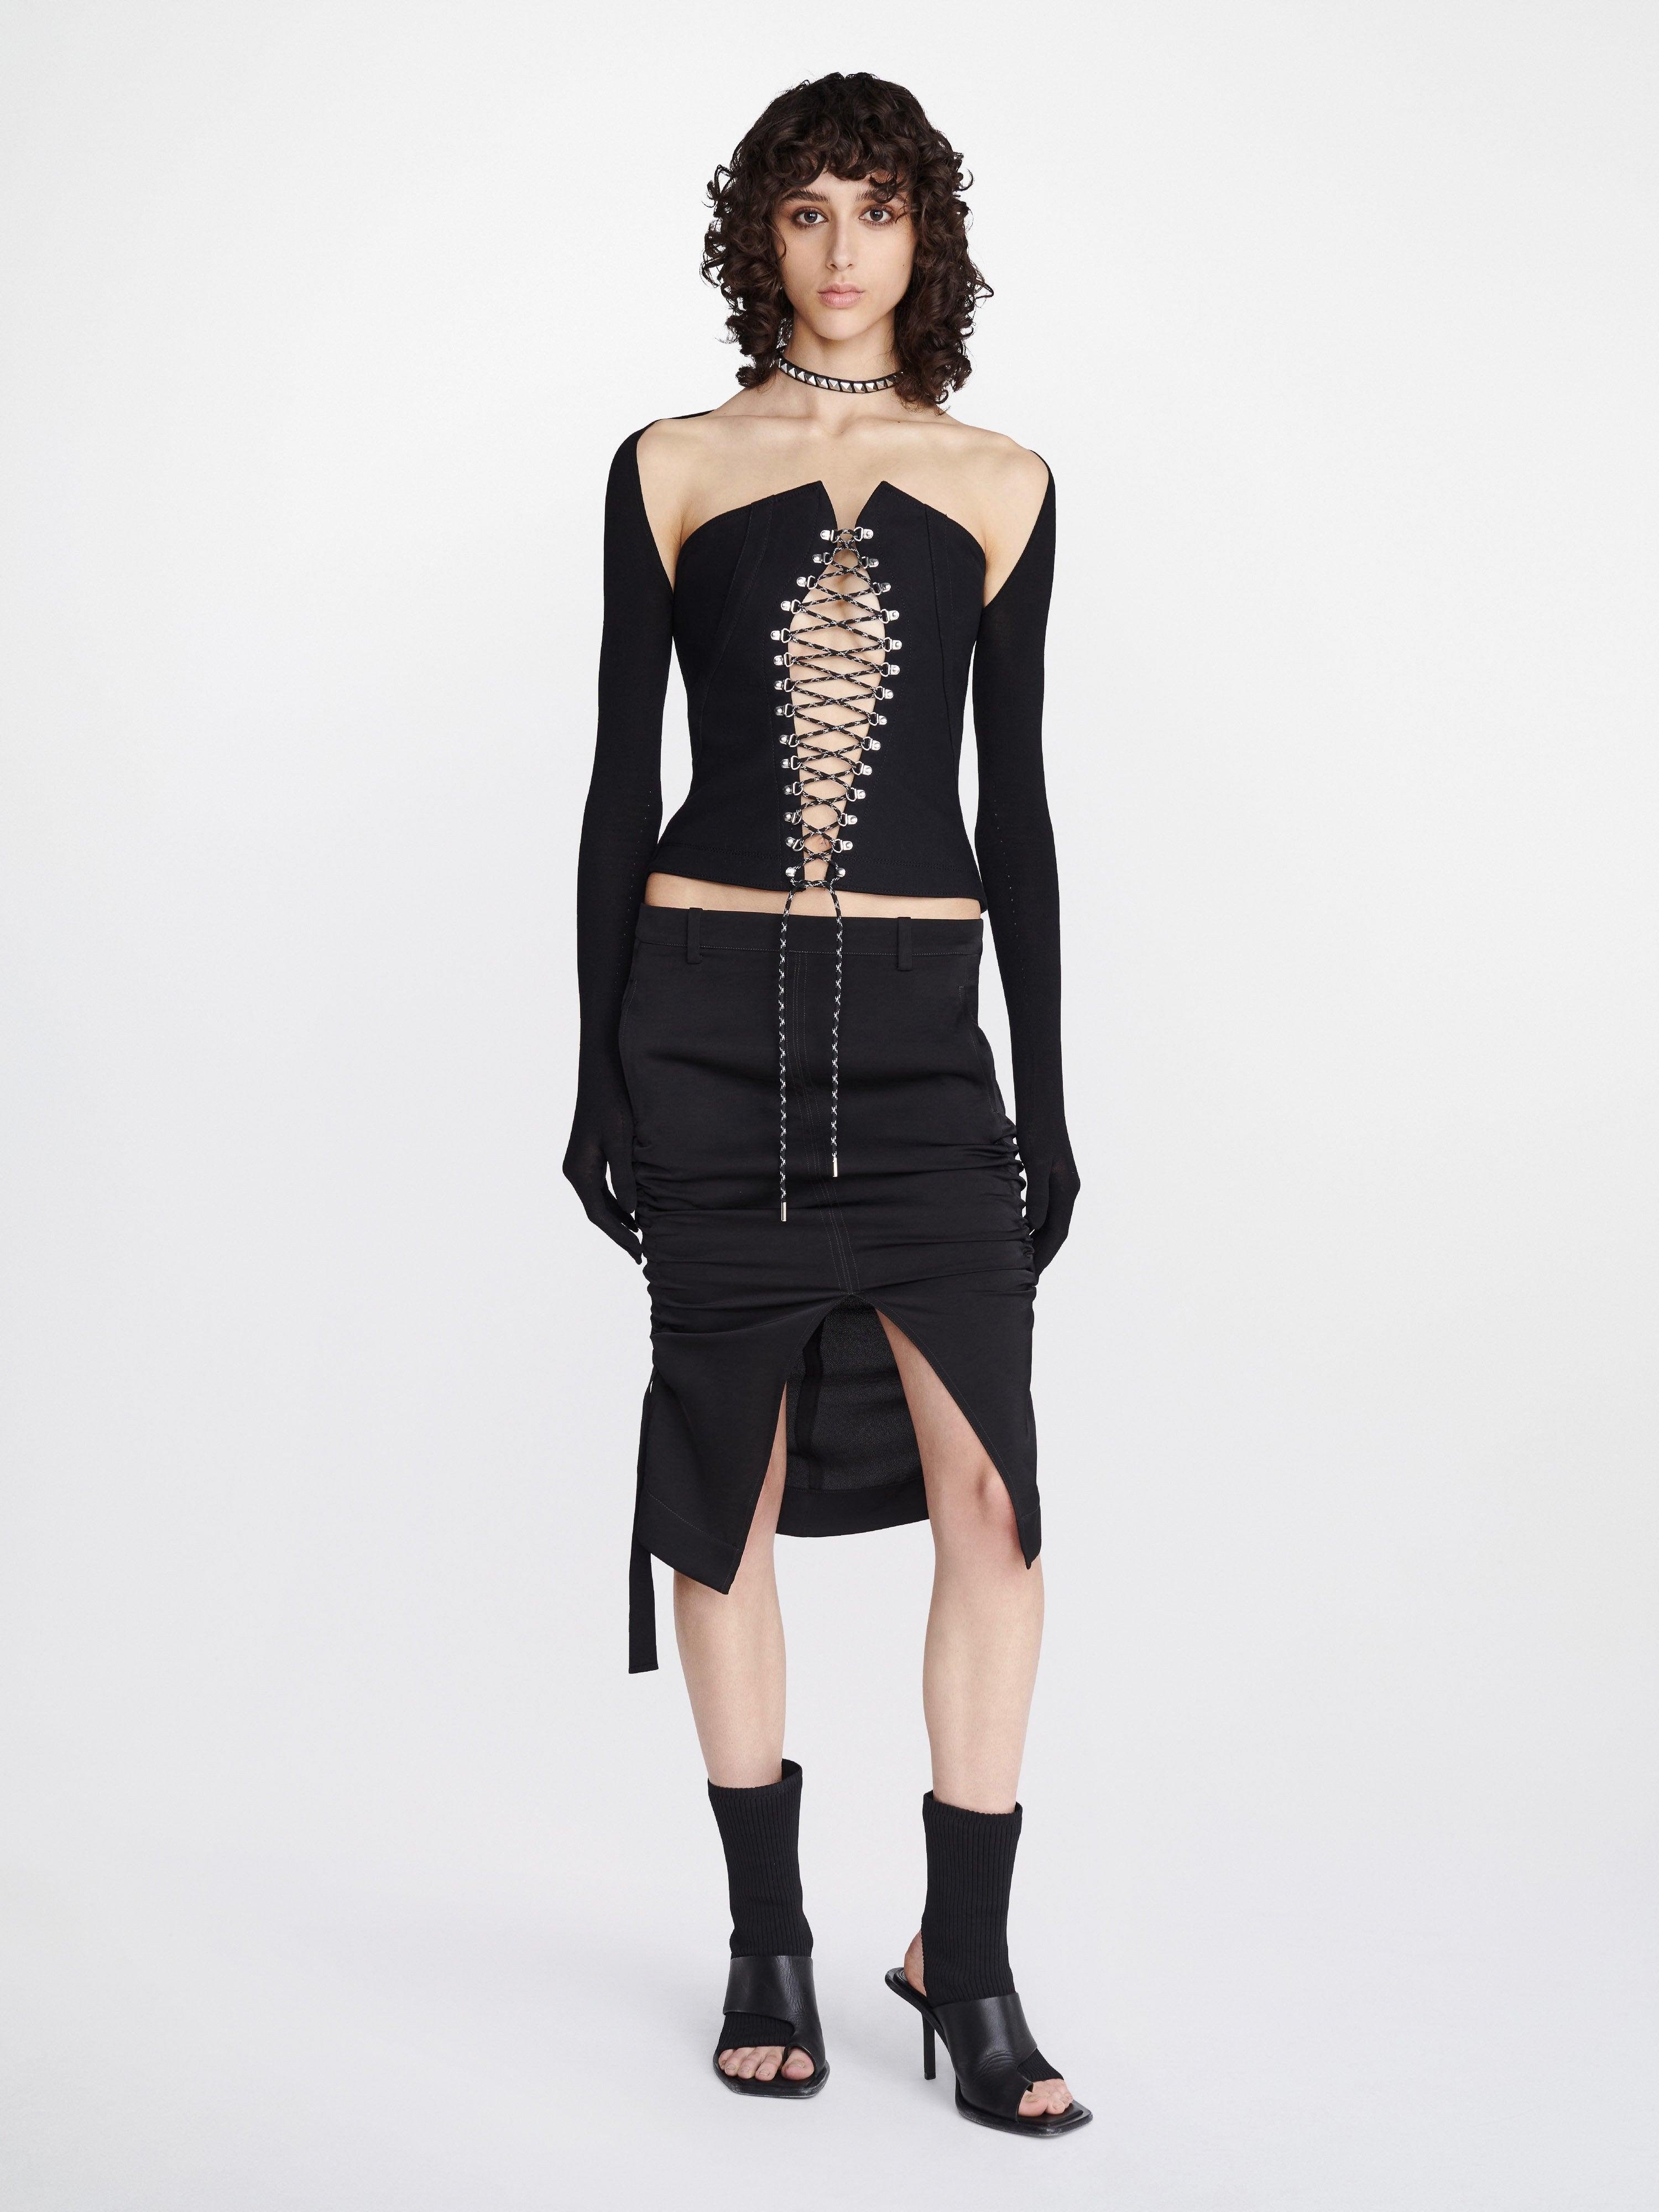 HIKING LACED CORSET by DION LEE